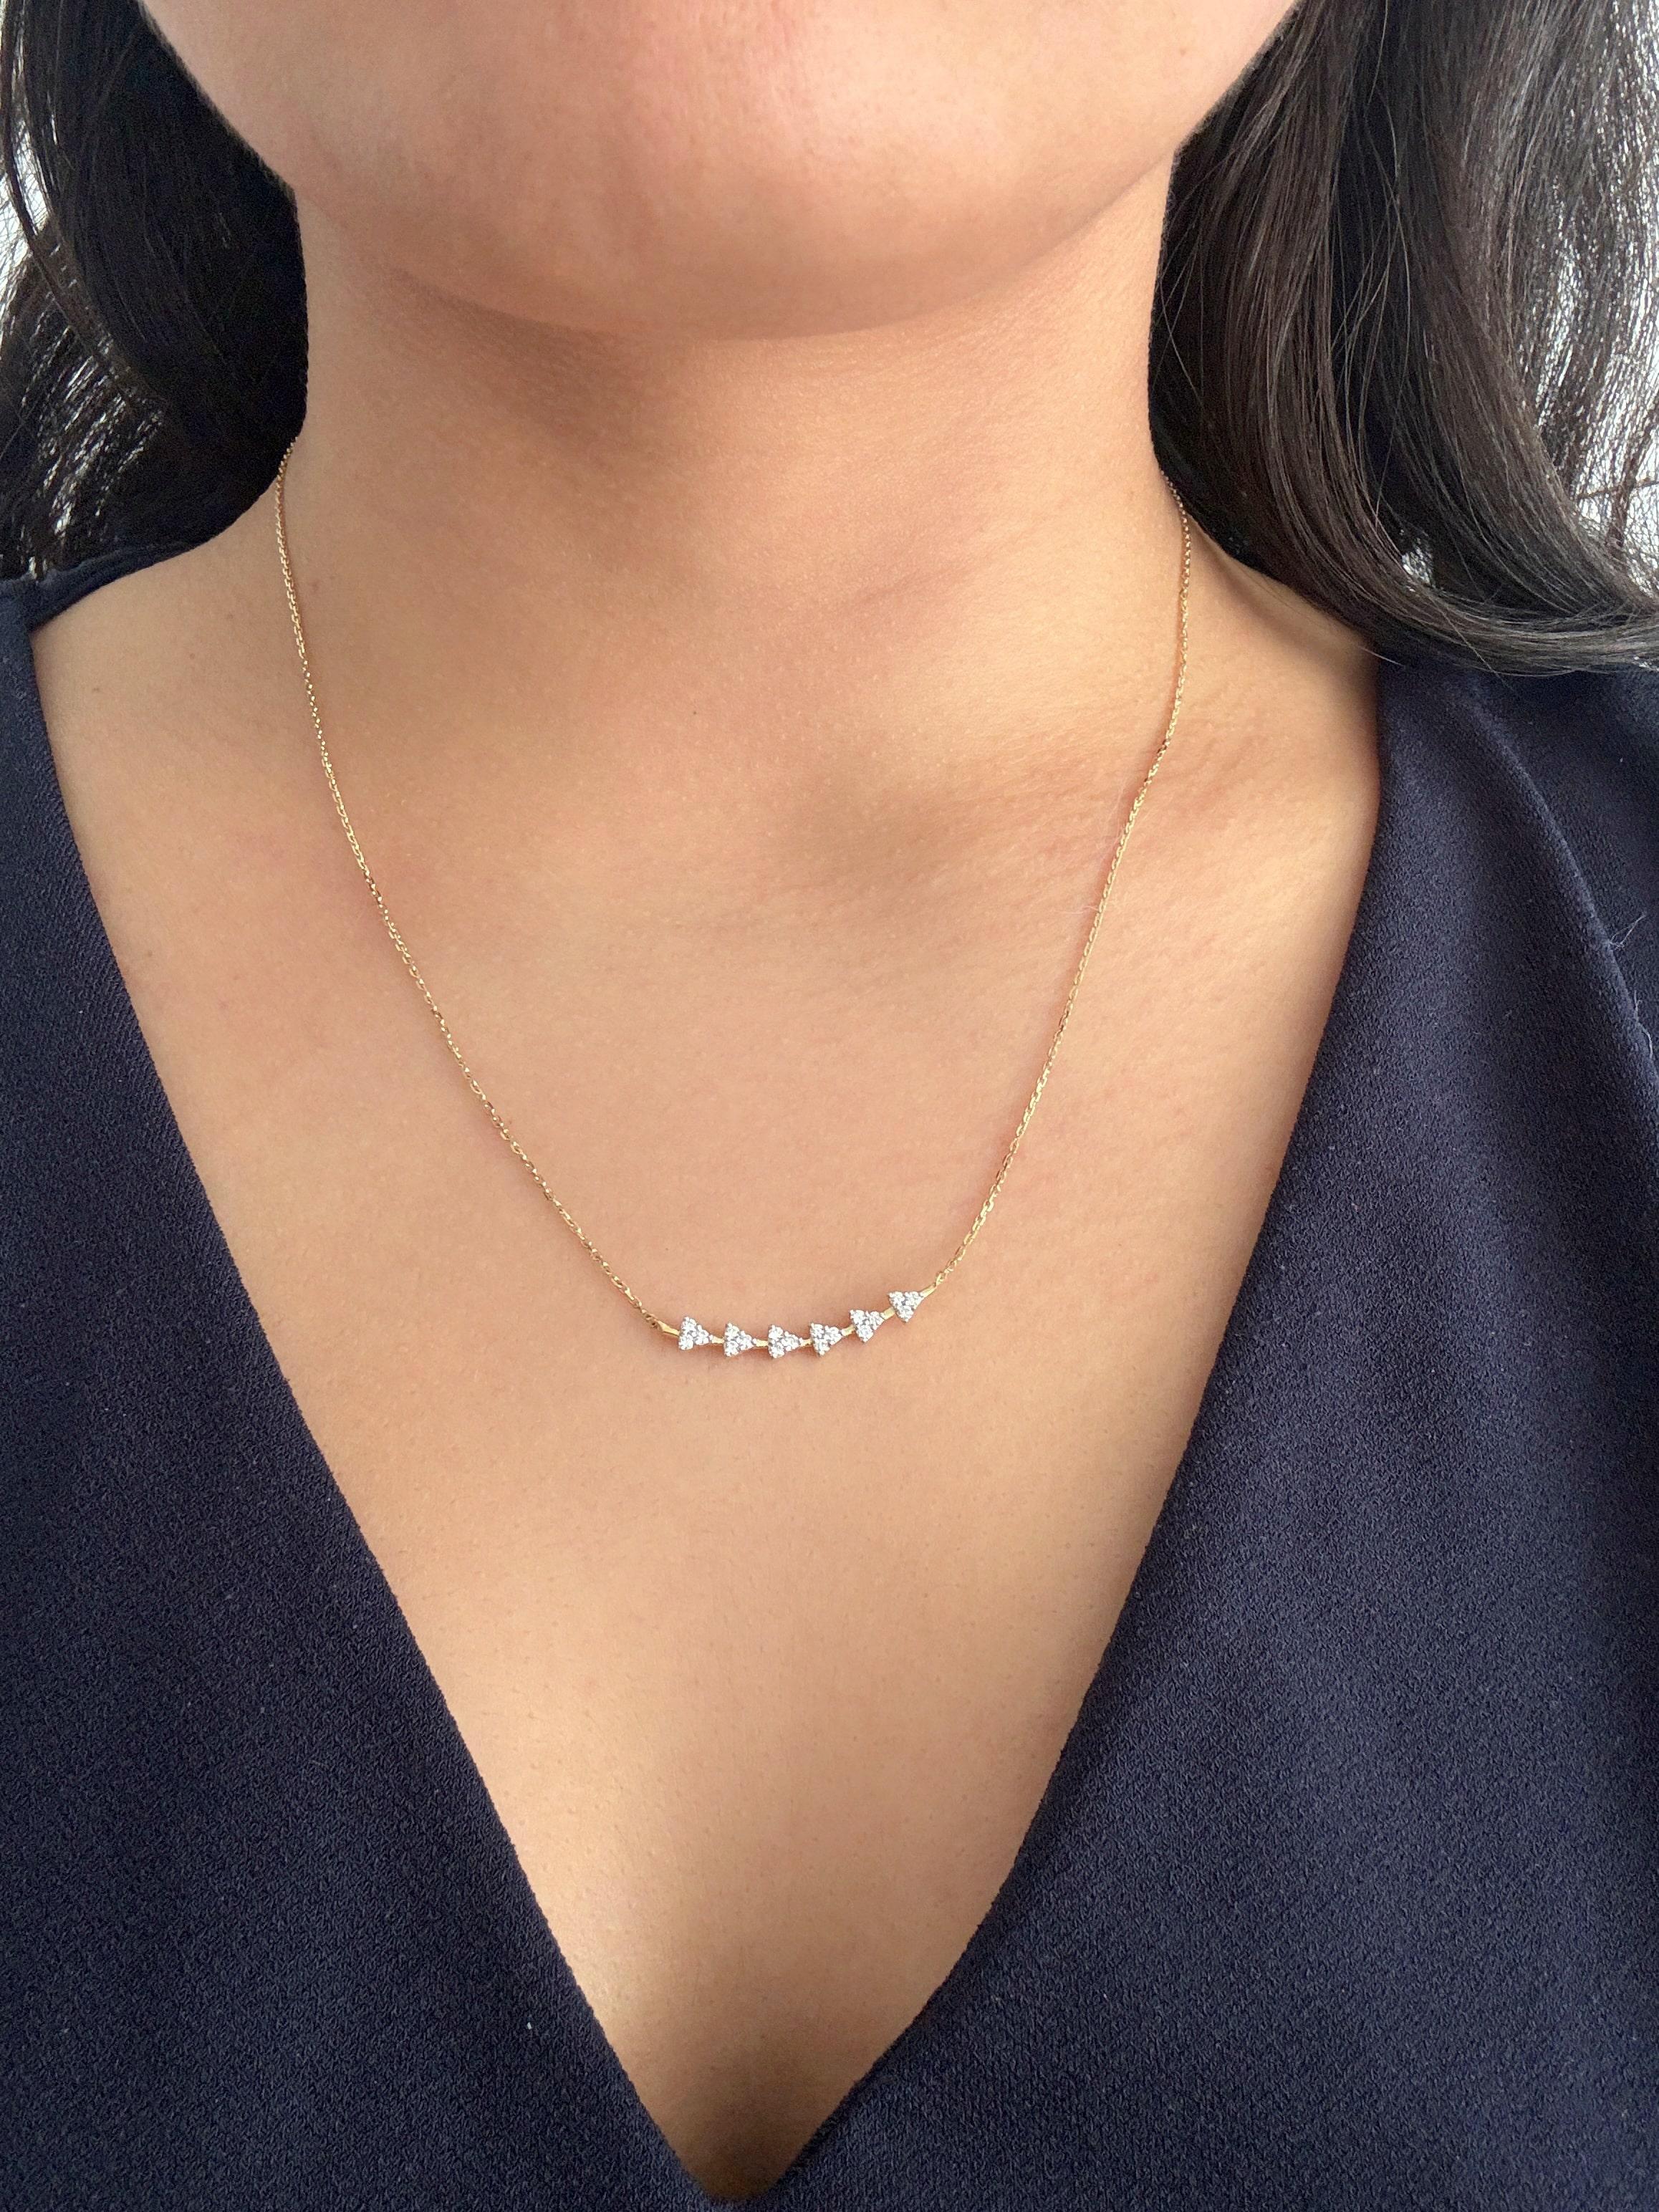 This diamond clusters bar pendant is a fashionable piece that is perfect for layering your necklaces for an everyday style. Crafted from genuine diamonds for maximum sparkle and shine, this timeless bar pendant offers an elegant and classic look.